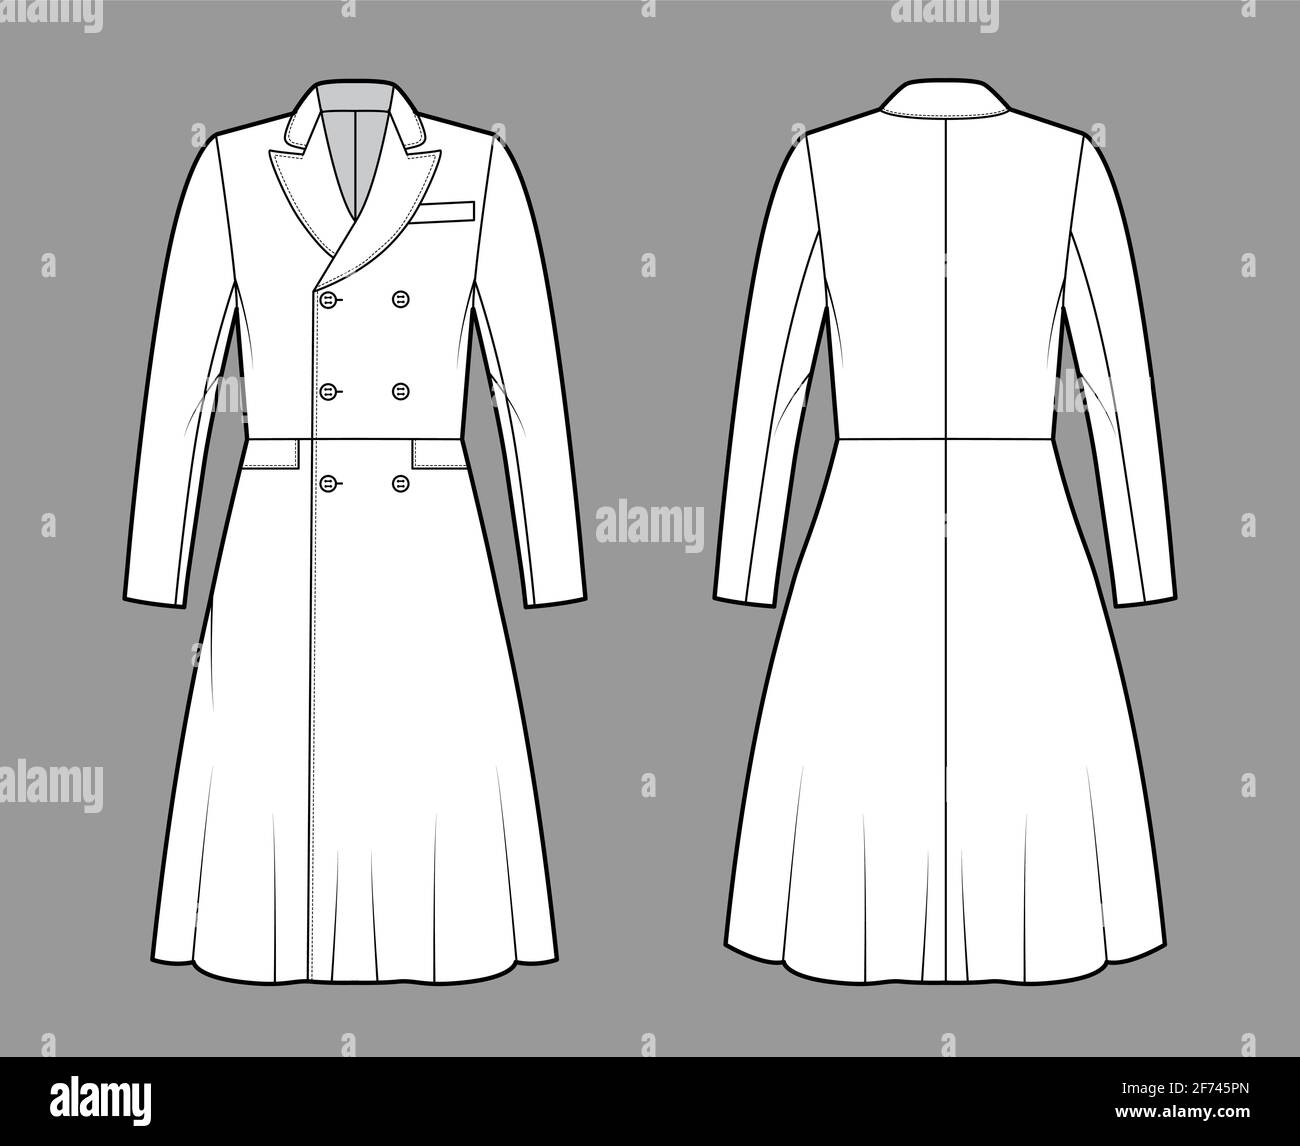 Frock coat technical fashion illustration with double breasted, long  sleeves, round collar peak, knee length, A-line skirt. Flat template front,  back, white color style. Women, men, unisex CAD mockup Stock Vector Image